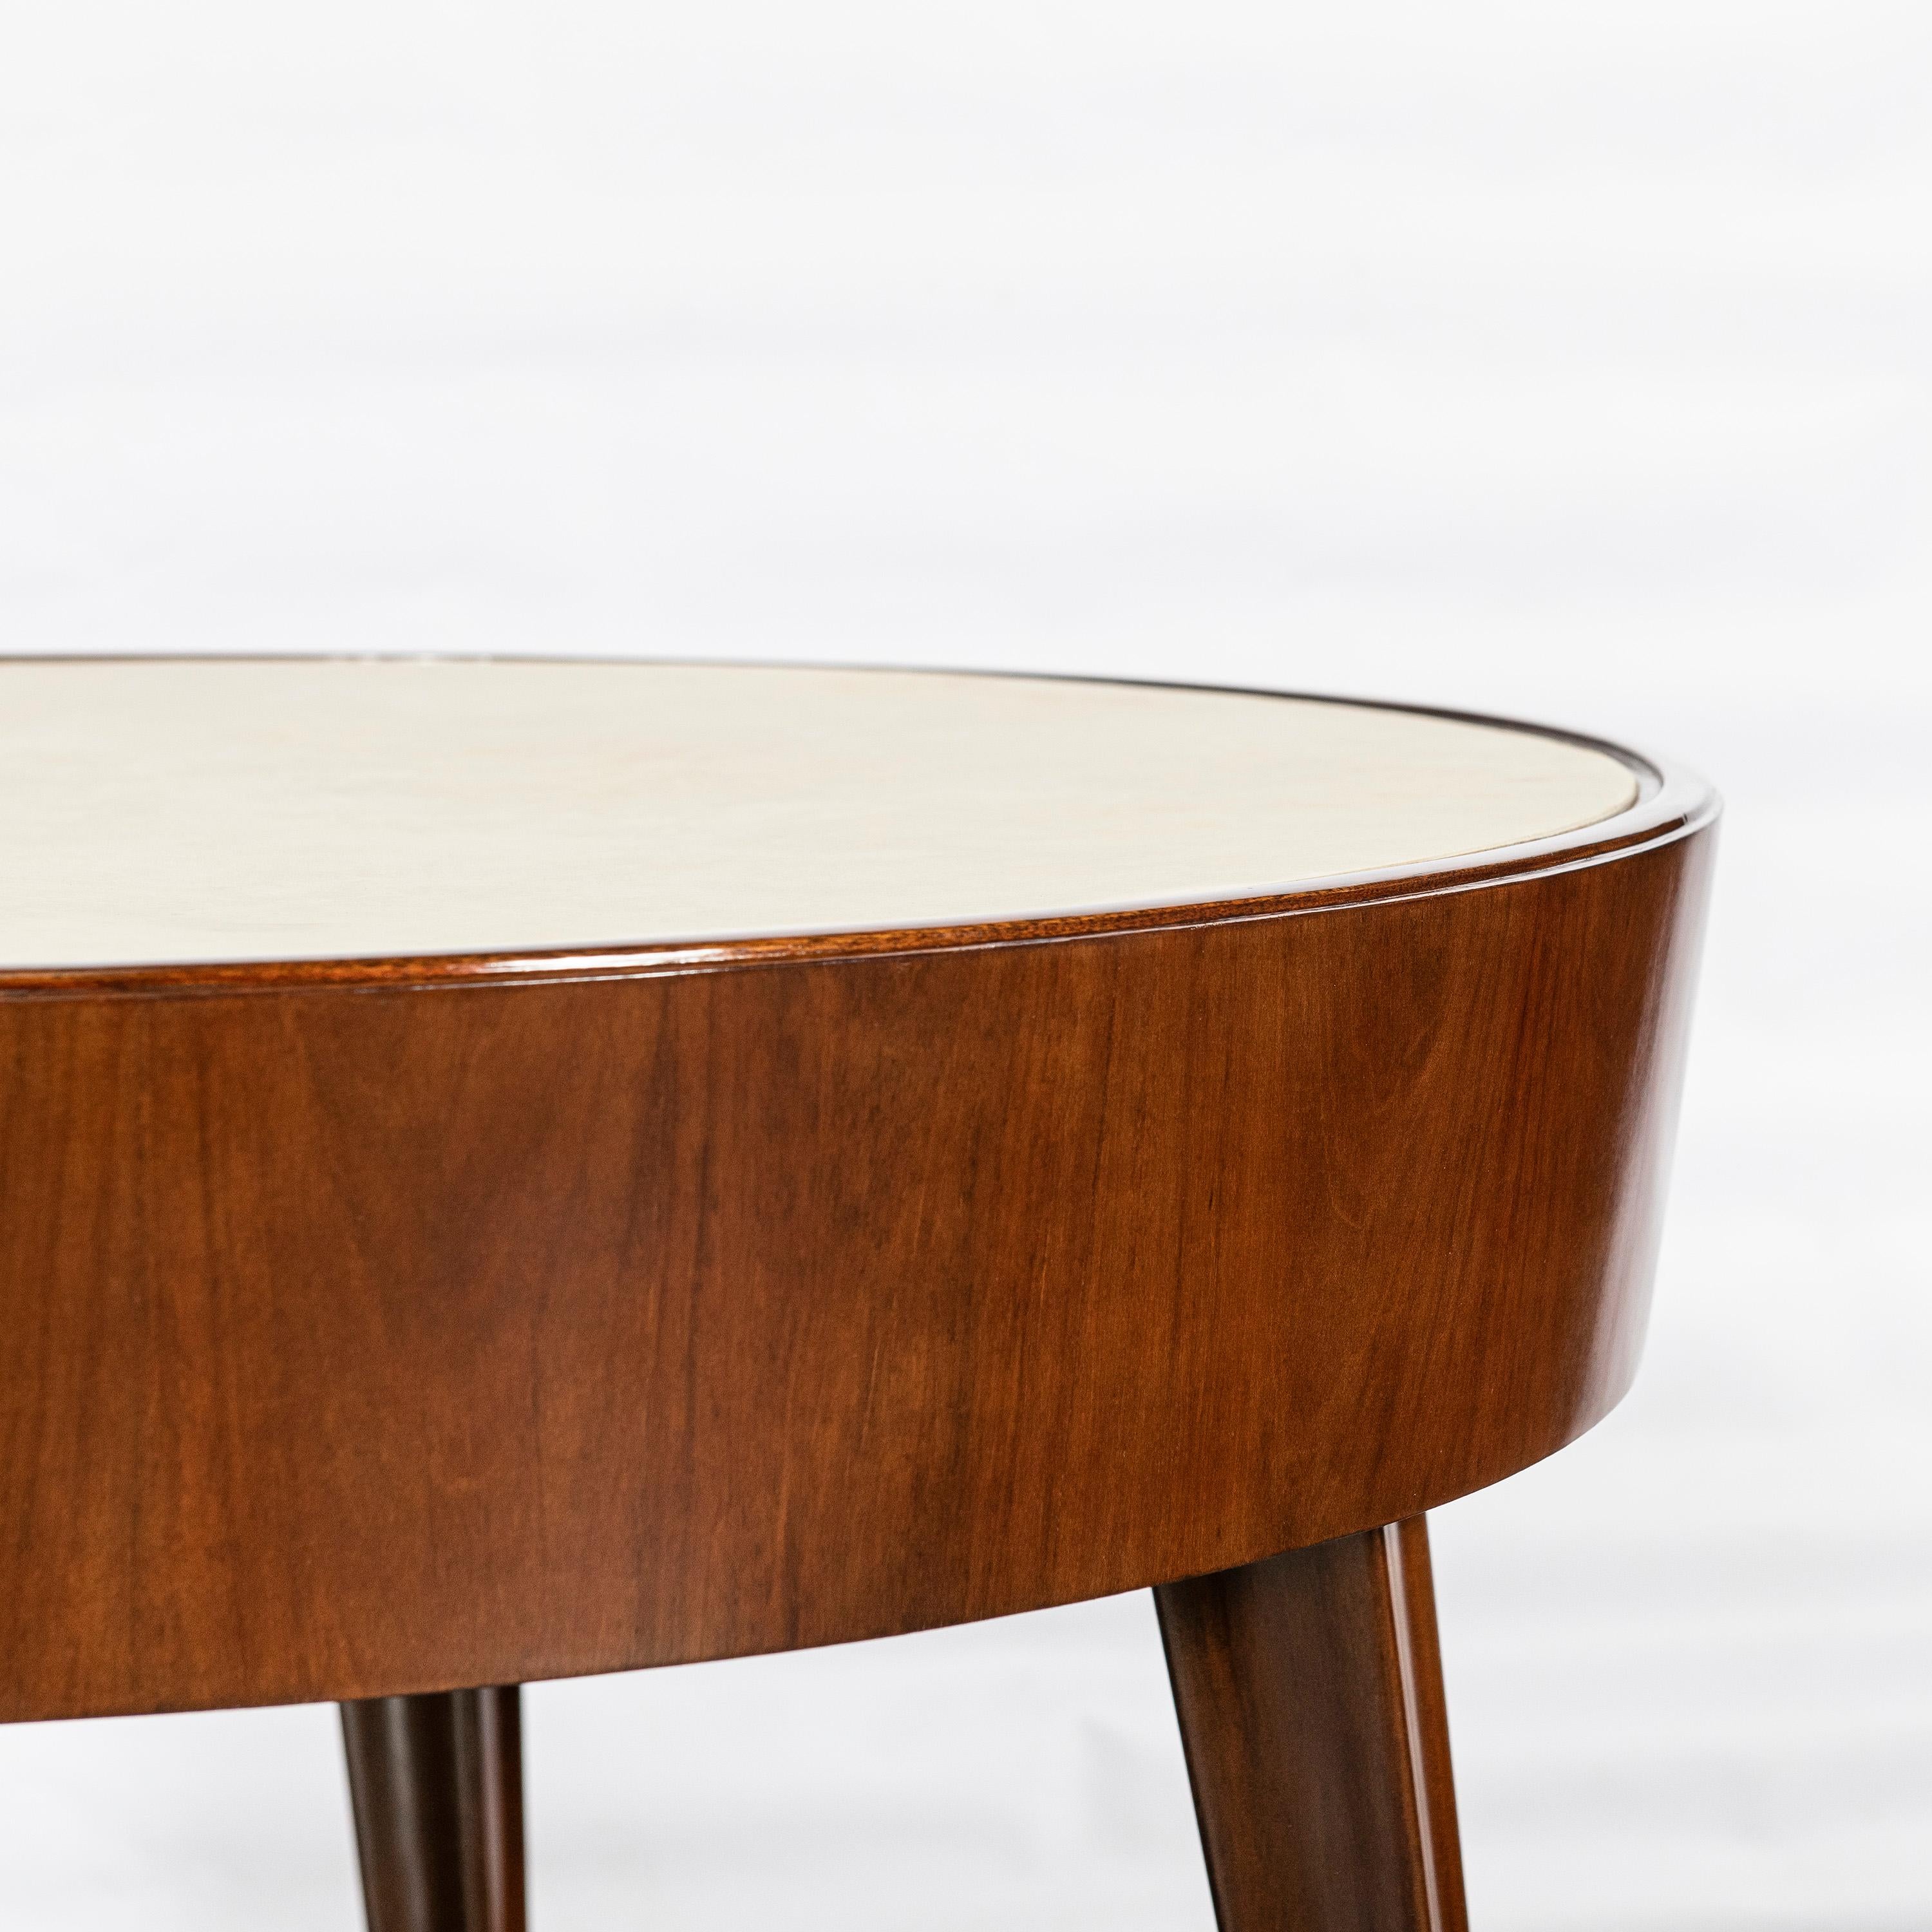 Argentine Wood and Parchment Low Round Table by Comte, Argentina, Buenos Aires, circa 1950 For Sale